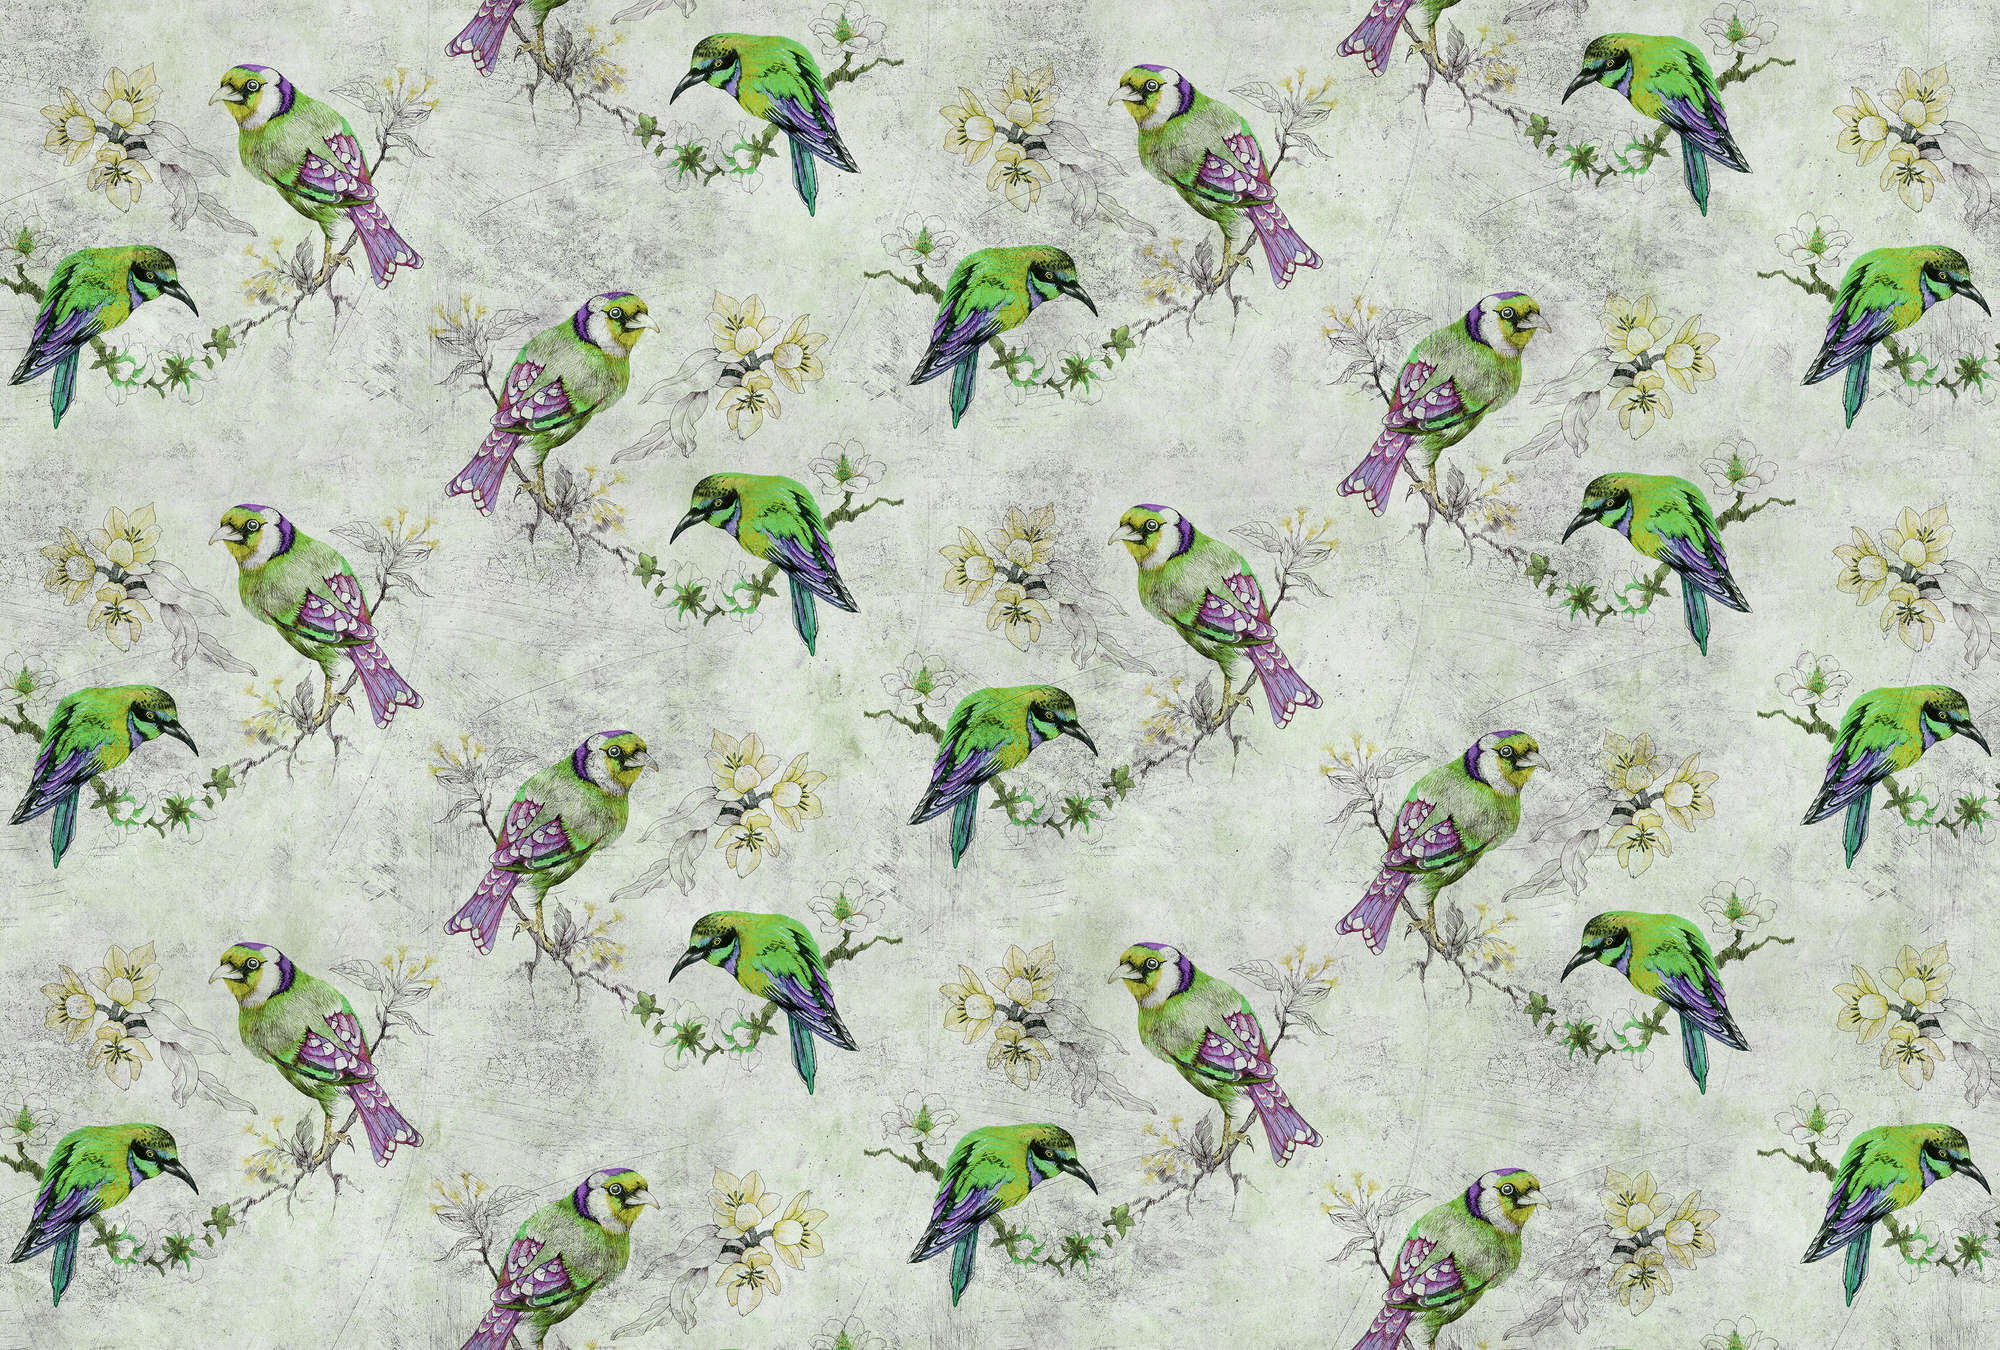             Love birds 2 - Colourful photo wallpaper in scratchy structure with sketched birds - Grey, Green | Pearl smooth fleece
        